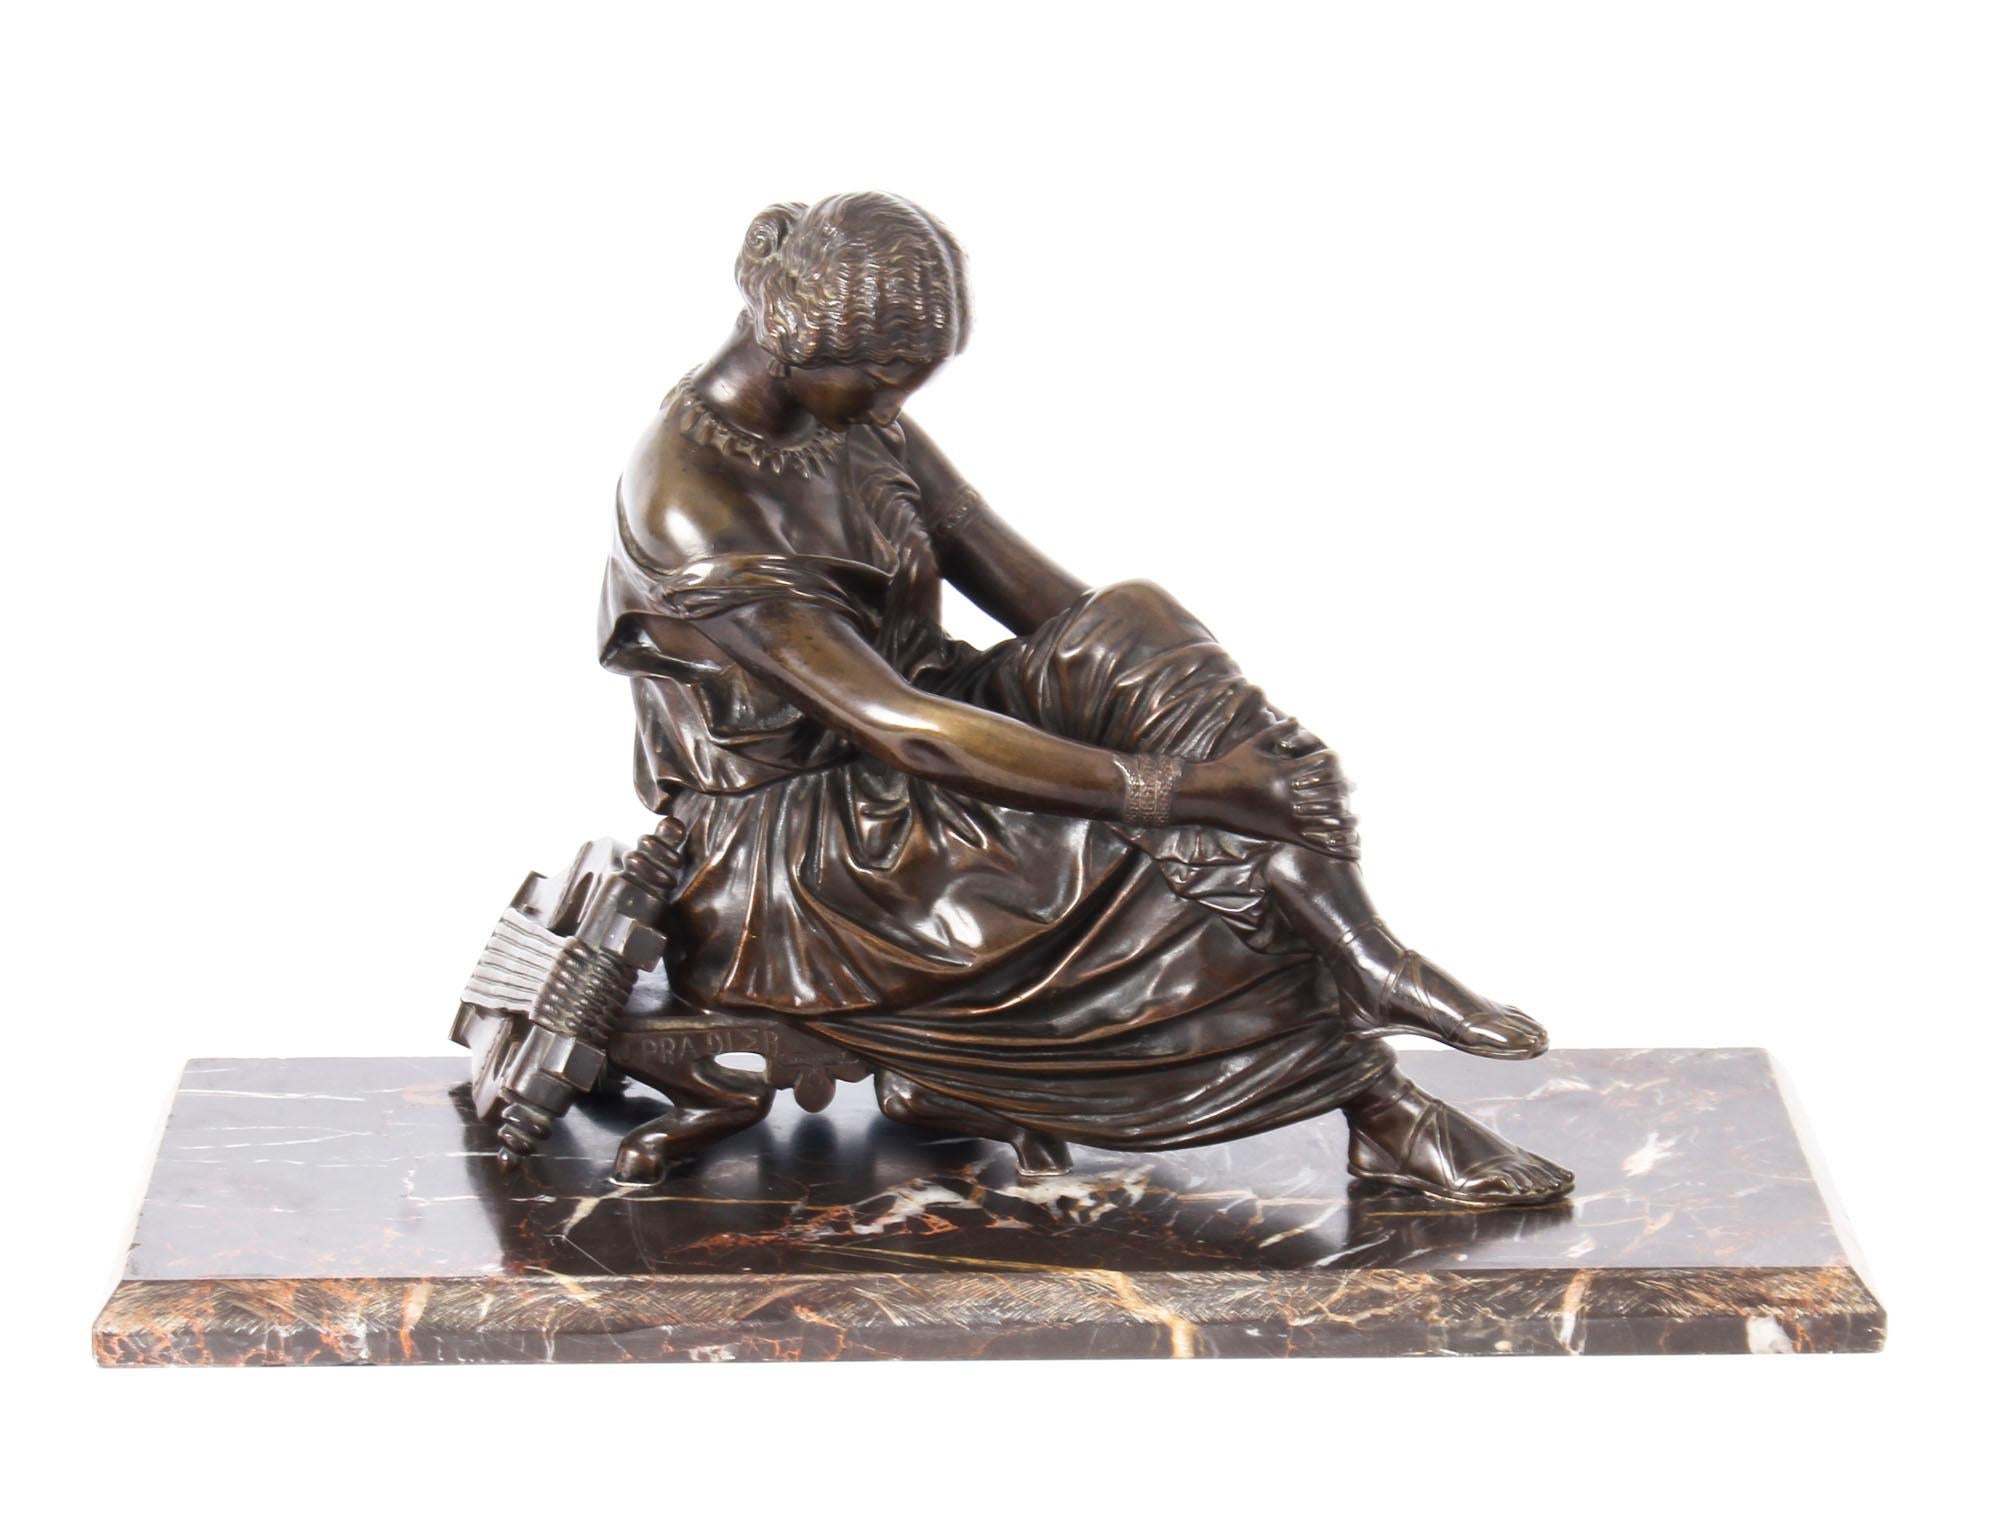 This is a magnificent antique French patinated bronze study sculpture of the allegorical figure of the Greek poetess, Sappho, mid 19th century in date.
 
This spectacular and exquisitely executed antique bronze sculpture is after the original